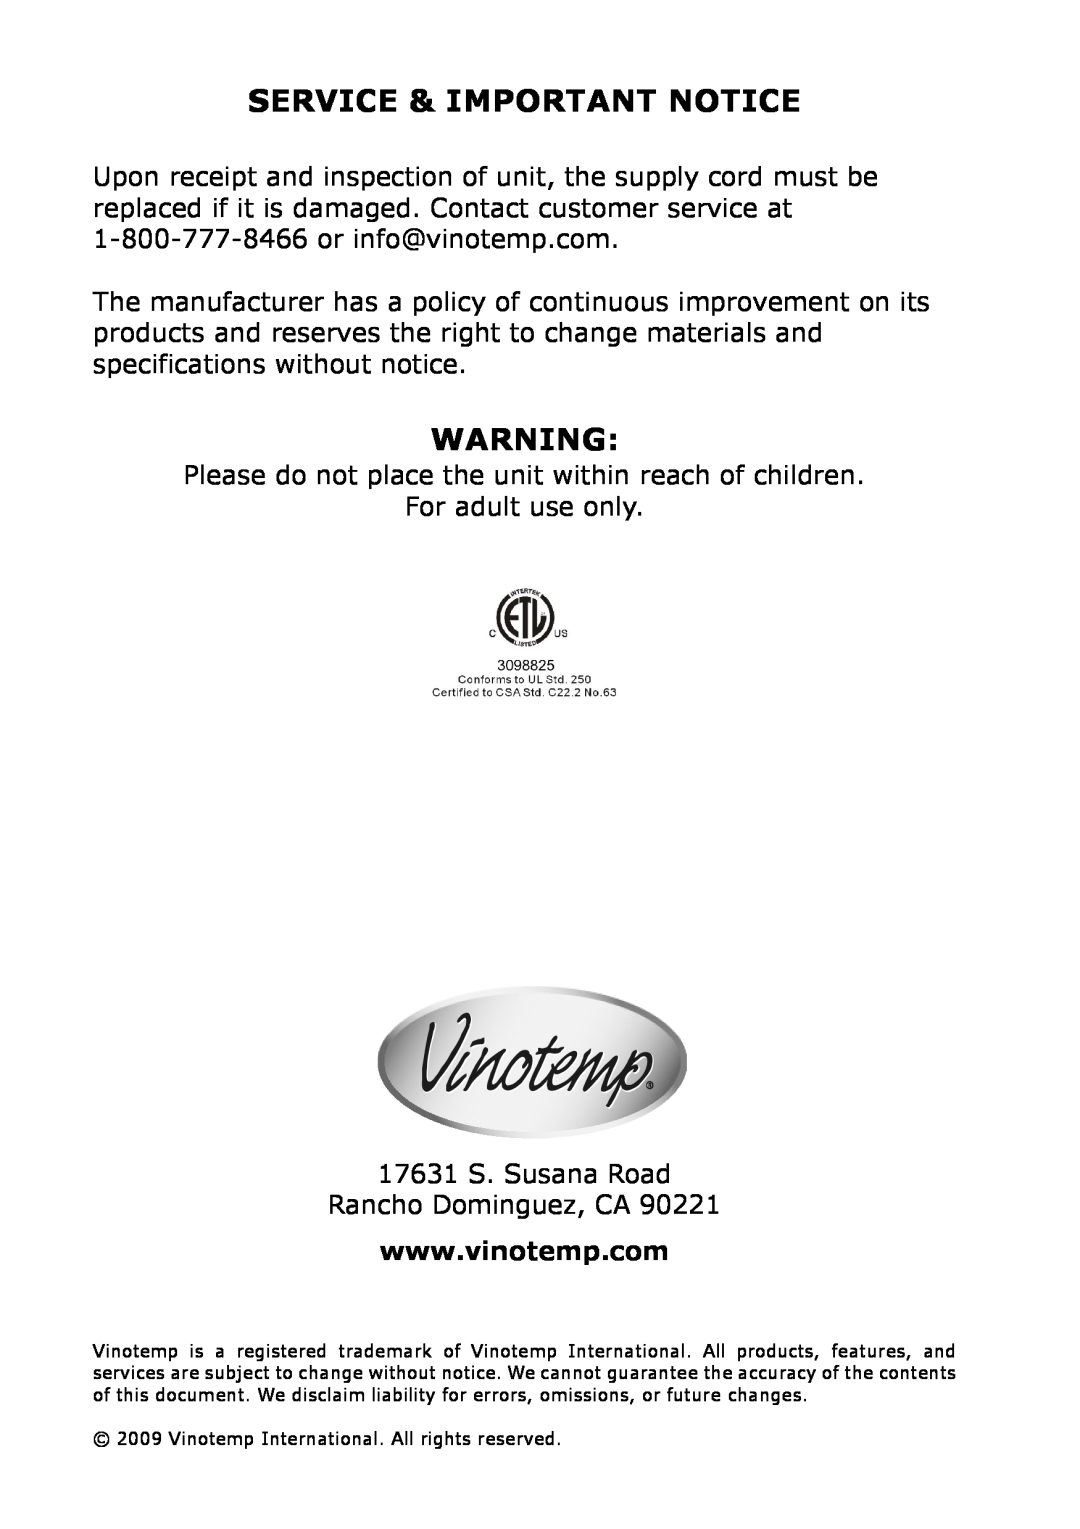 Vinotemp VT-6TED-WW, VT-6TED-WB owner manual Service & Important Notice 